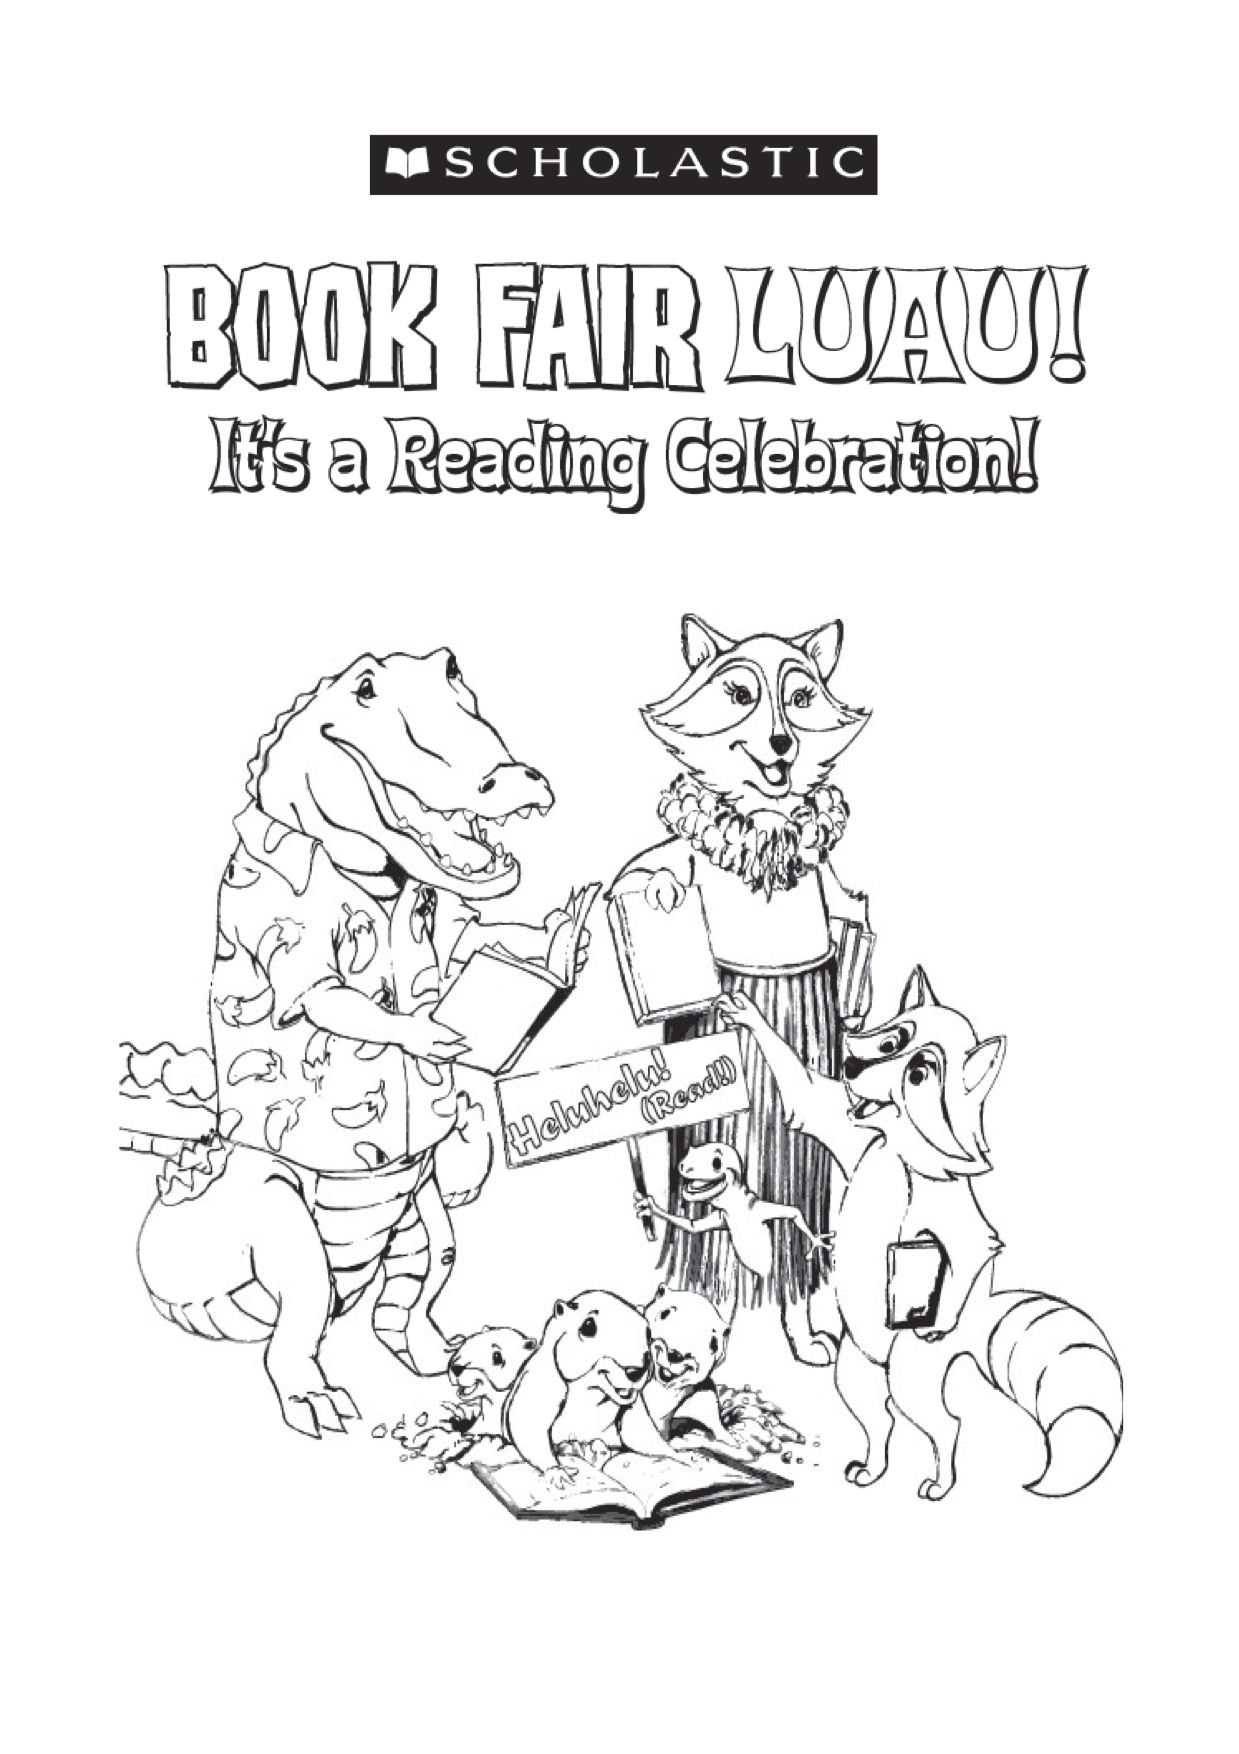 Fair Coloring Pages: County Fair Coloring Pages, County Fair ...